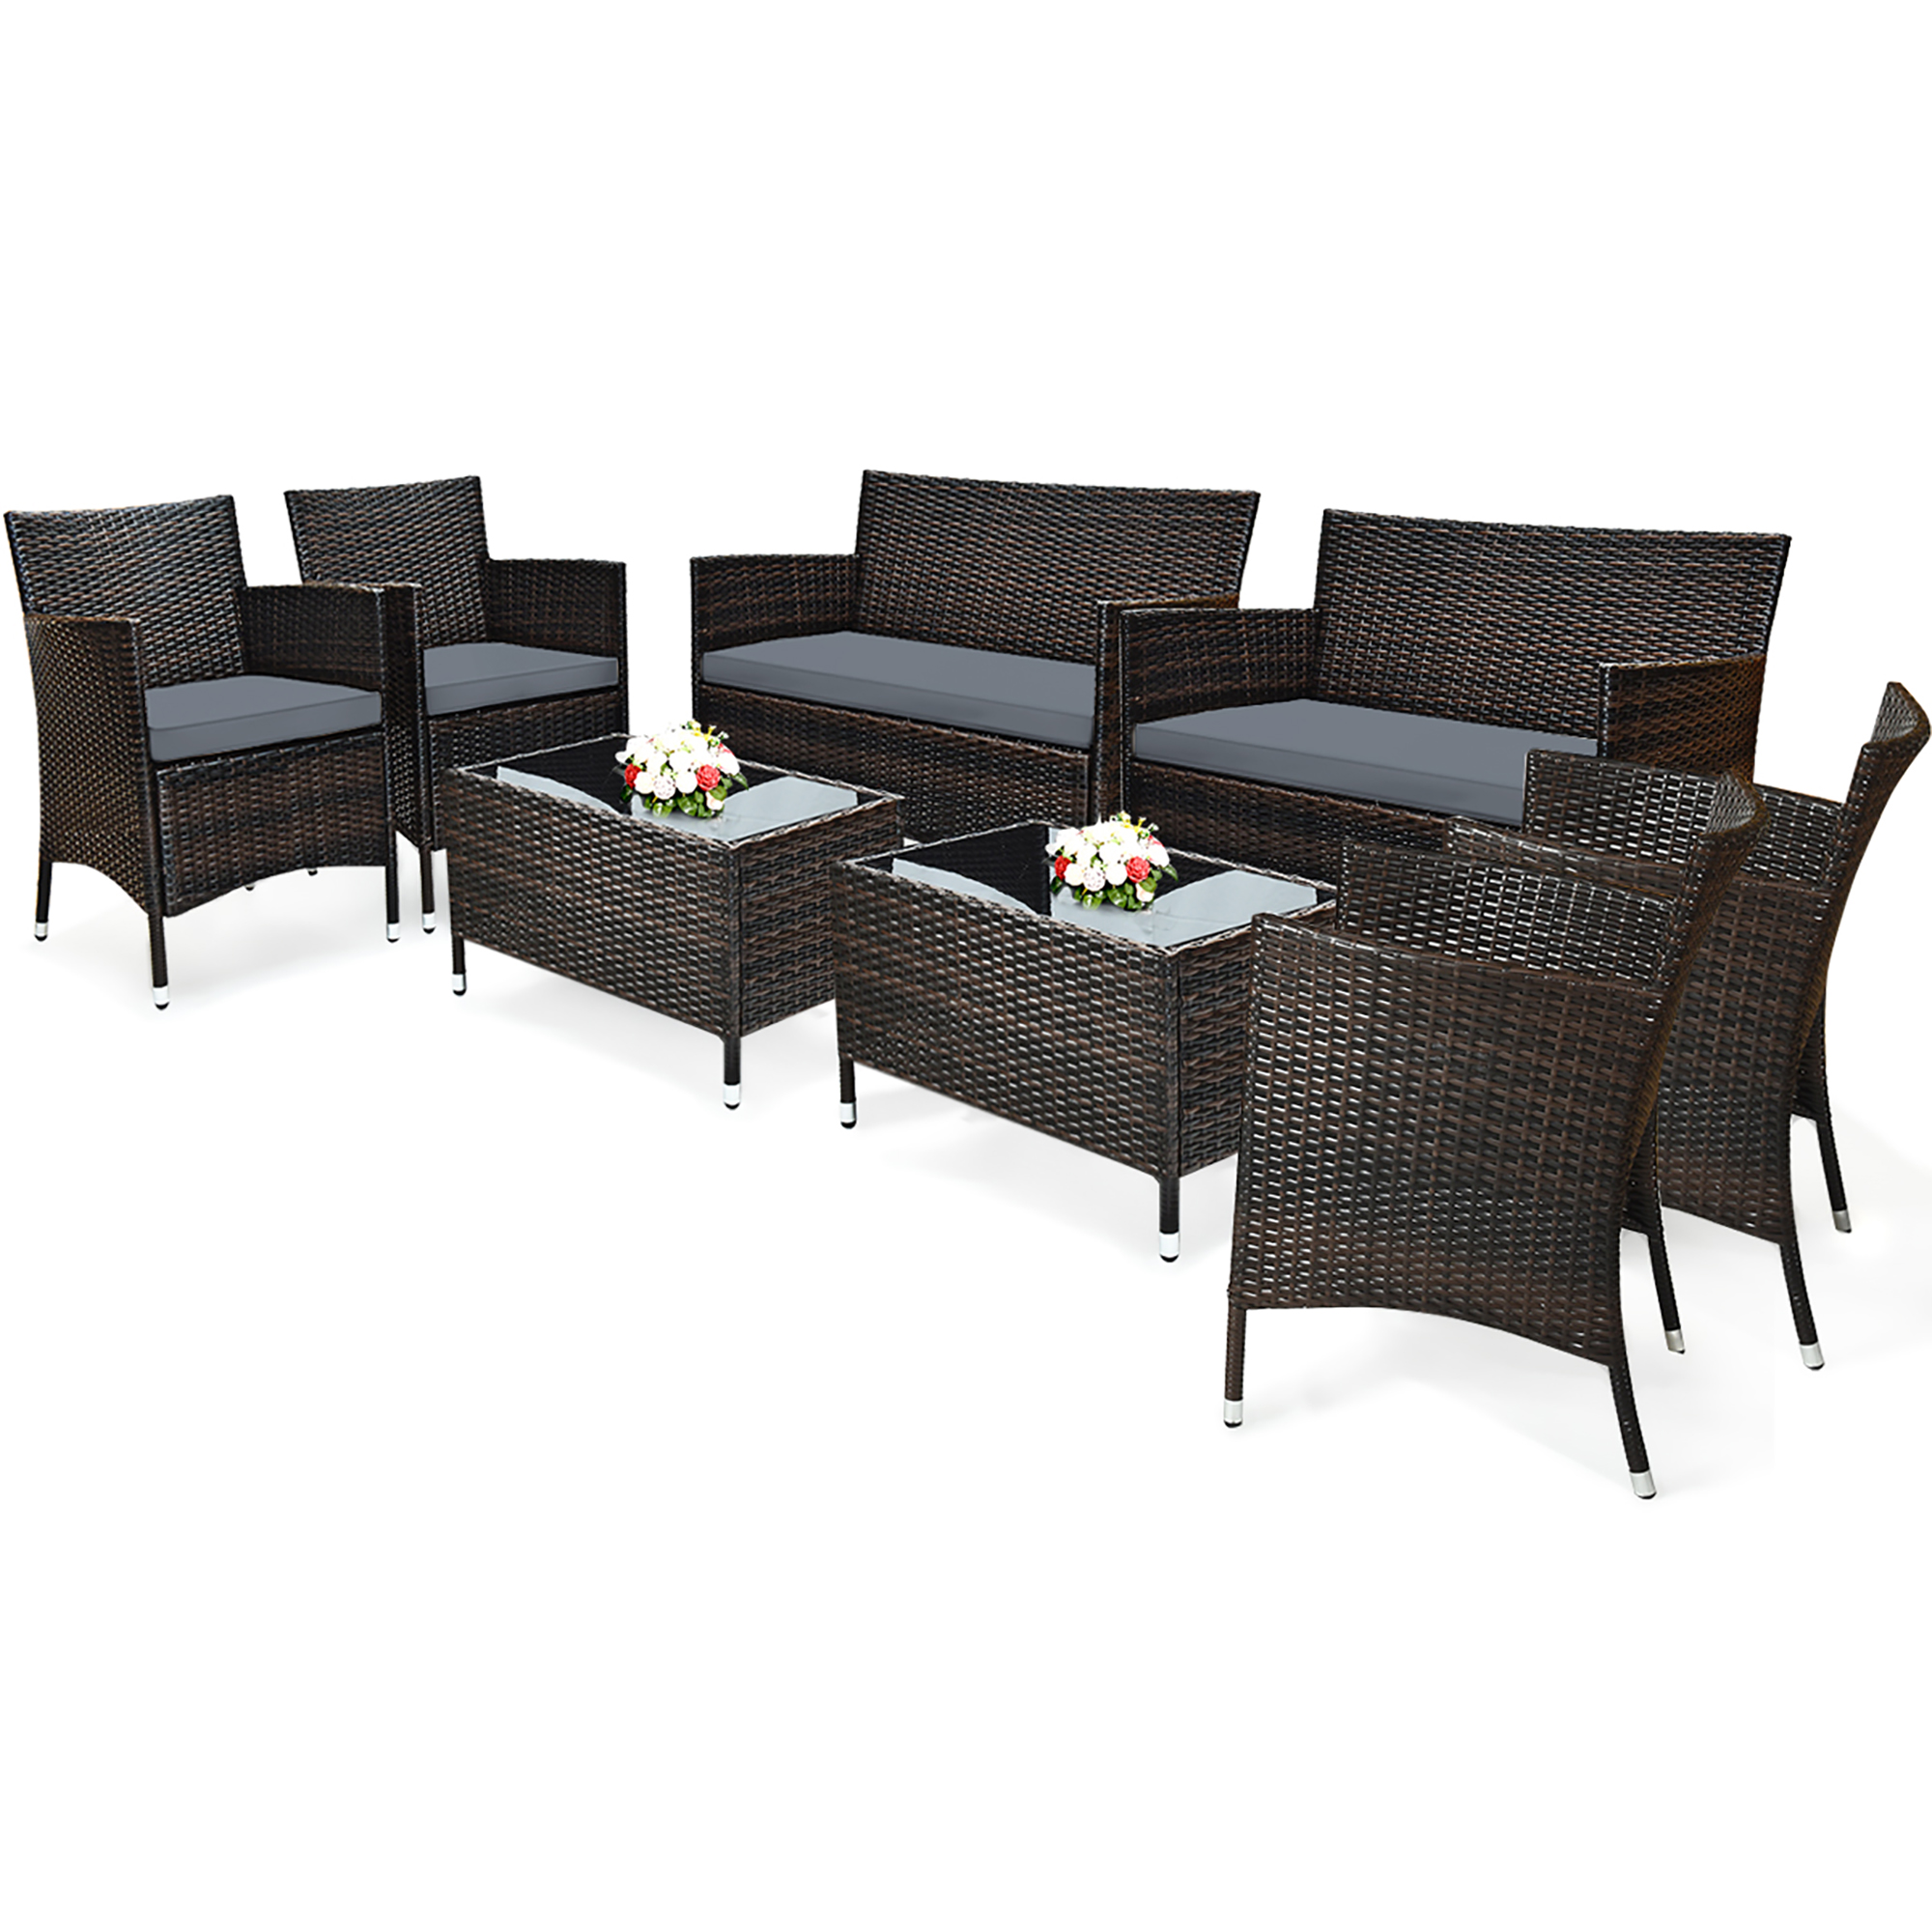 Costway 8PCS Rattan Patio Furniture Set Cushioned Sofa Chair Coffee Table Garden Grey - image 2 of 10